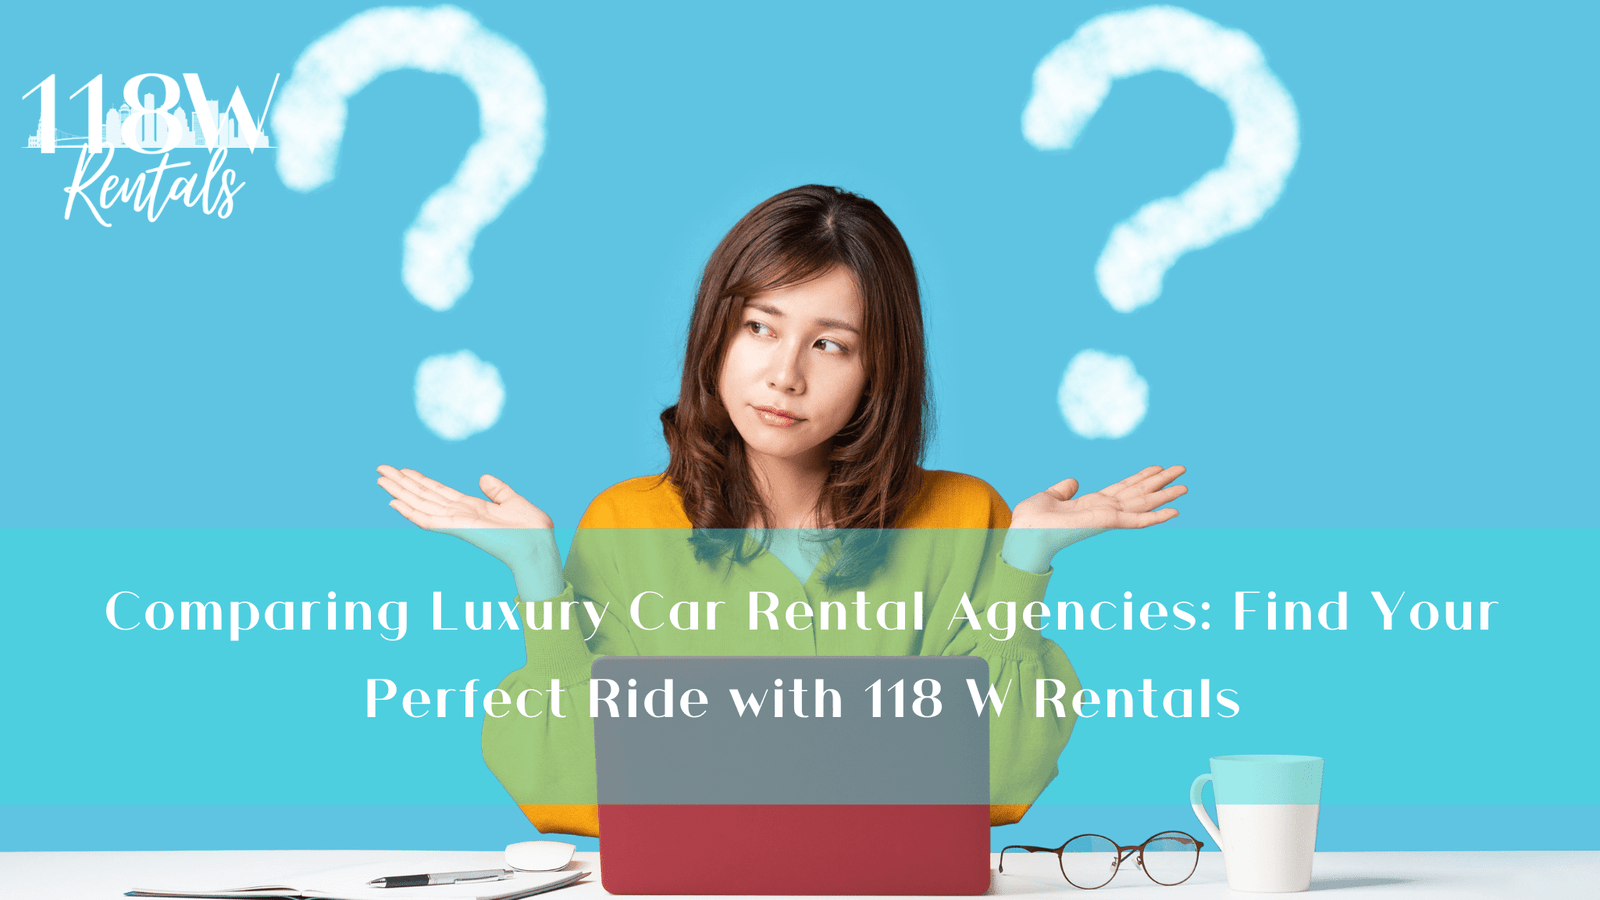 Comparing Luxury Car Rental Agencies: Find Your Perfect Ride with 118 W Rentals